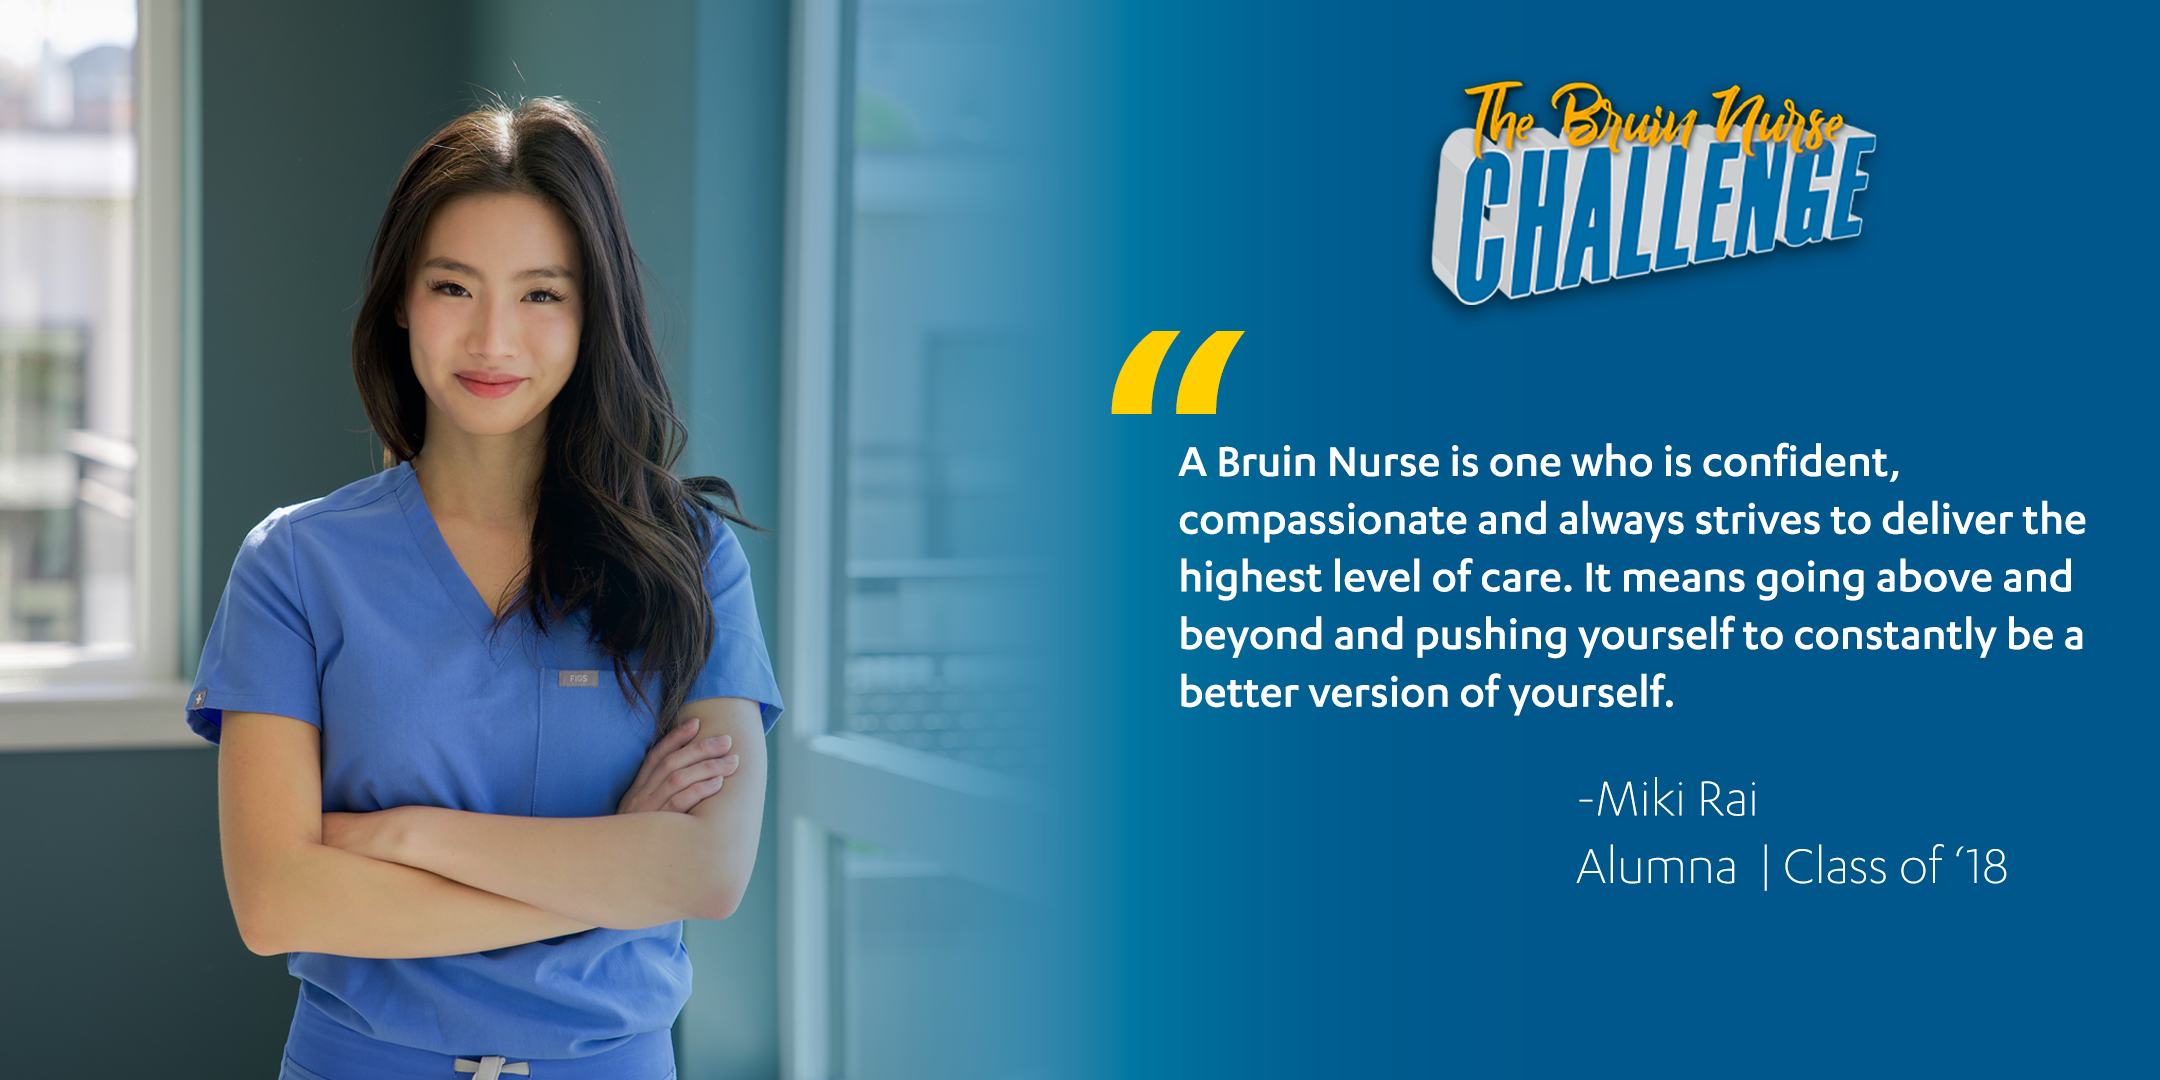 Bruin Nurse Challenge graphic featuring Miki Rai's quote, "A Bruin Nurse is one who is confident, compassionate and always strives to deliver the highest level of care. It means going above and beyond and pushing yourself to constantly be a better version of yourself."